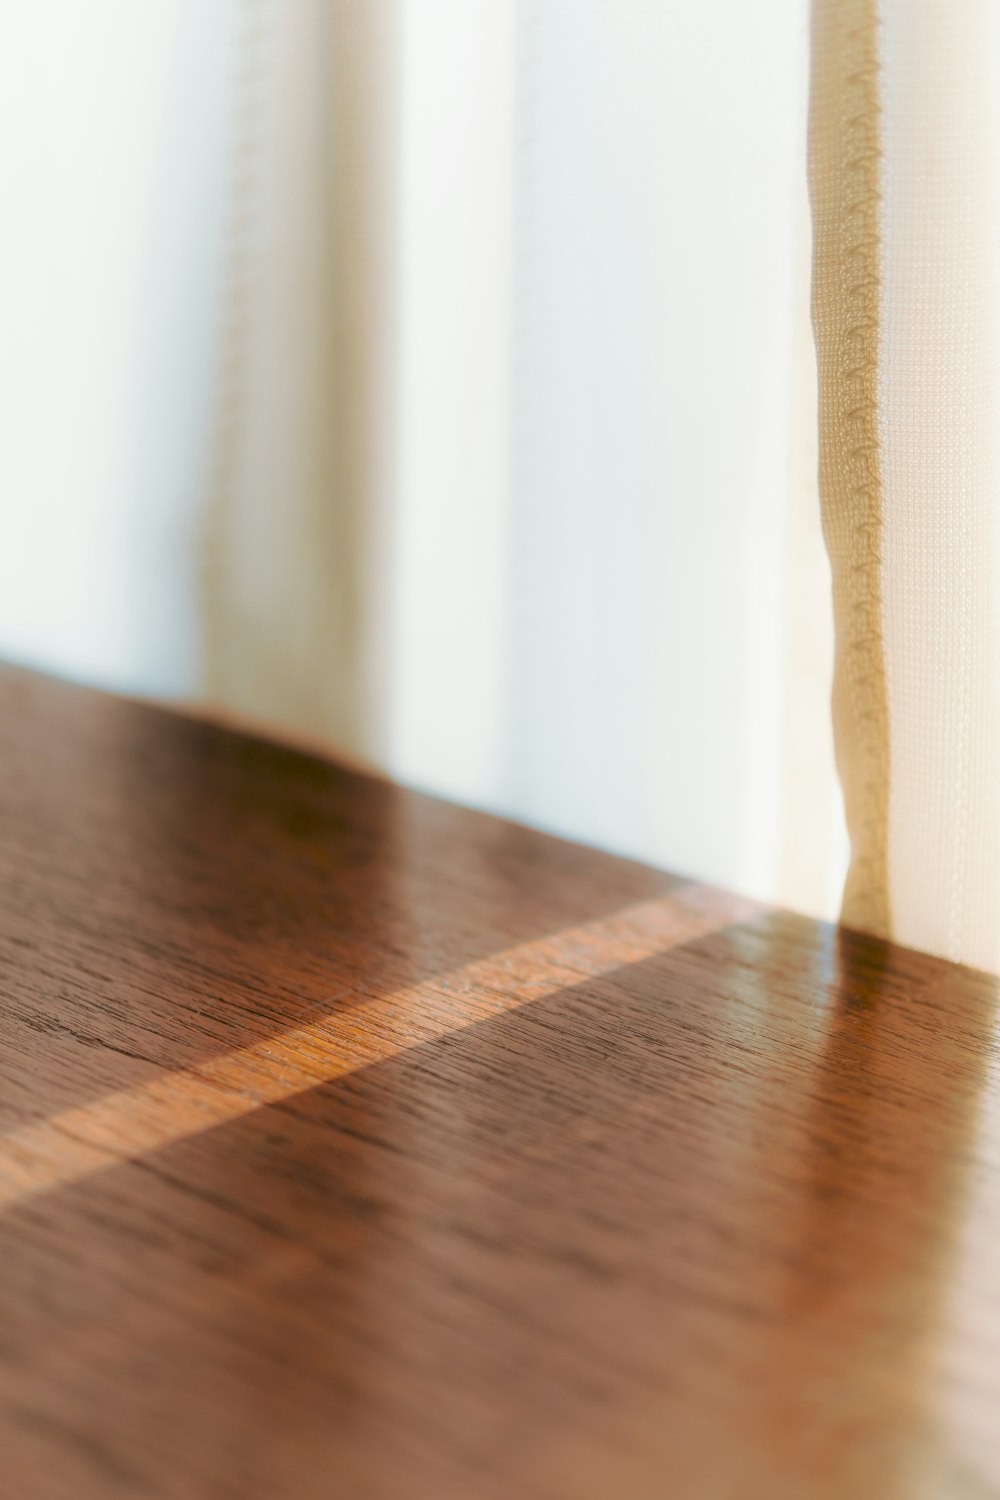 a close up of a wooden table with a white curtain in the background